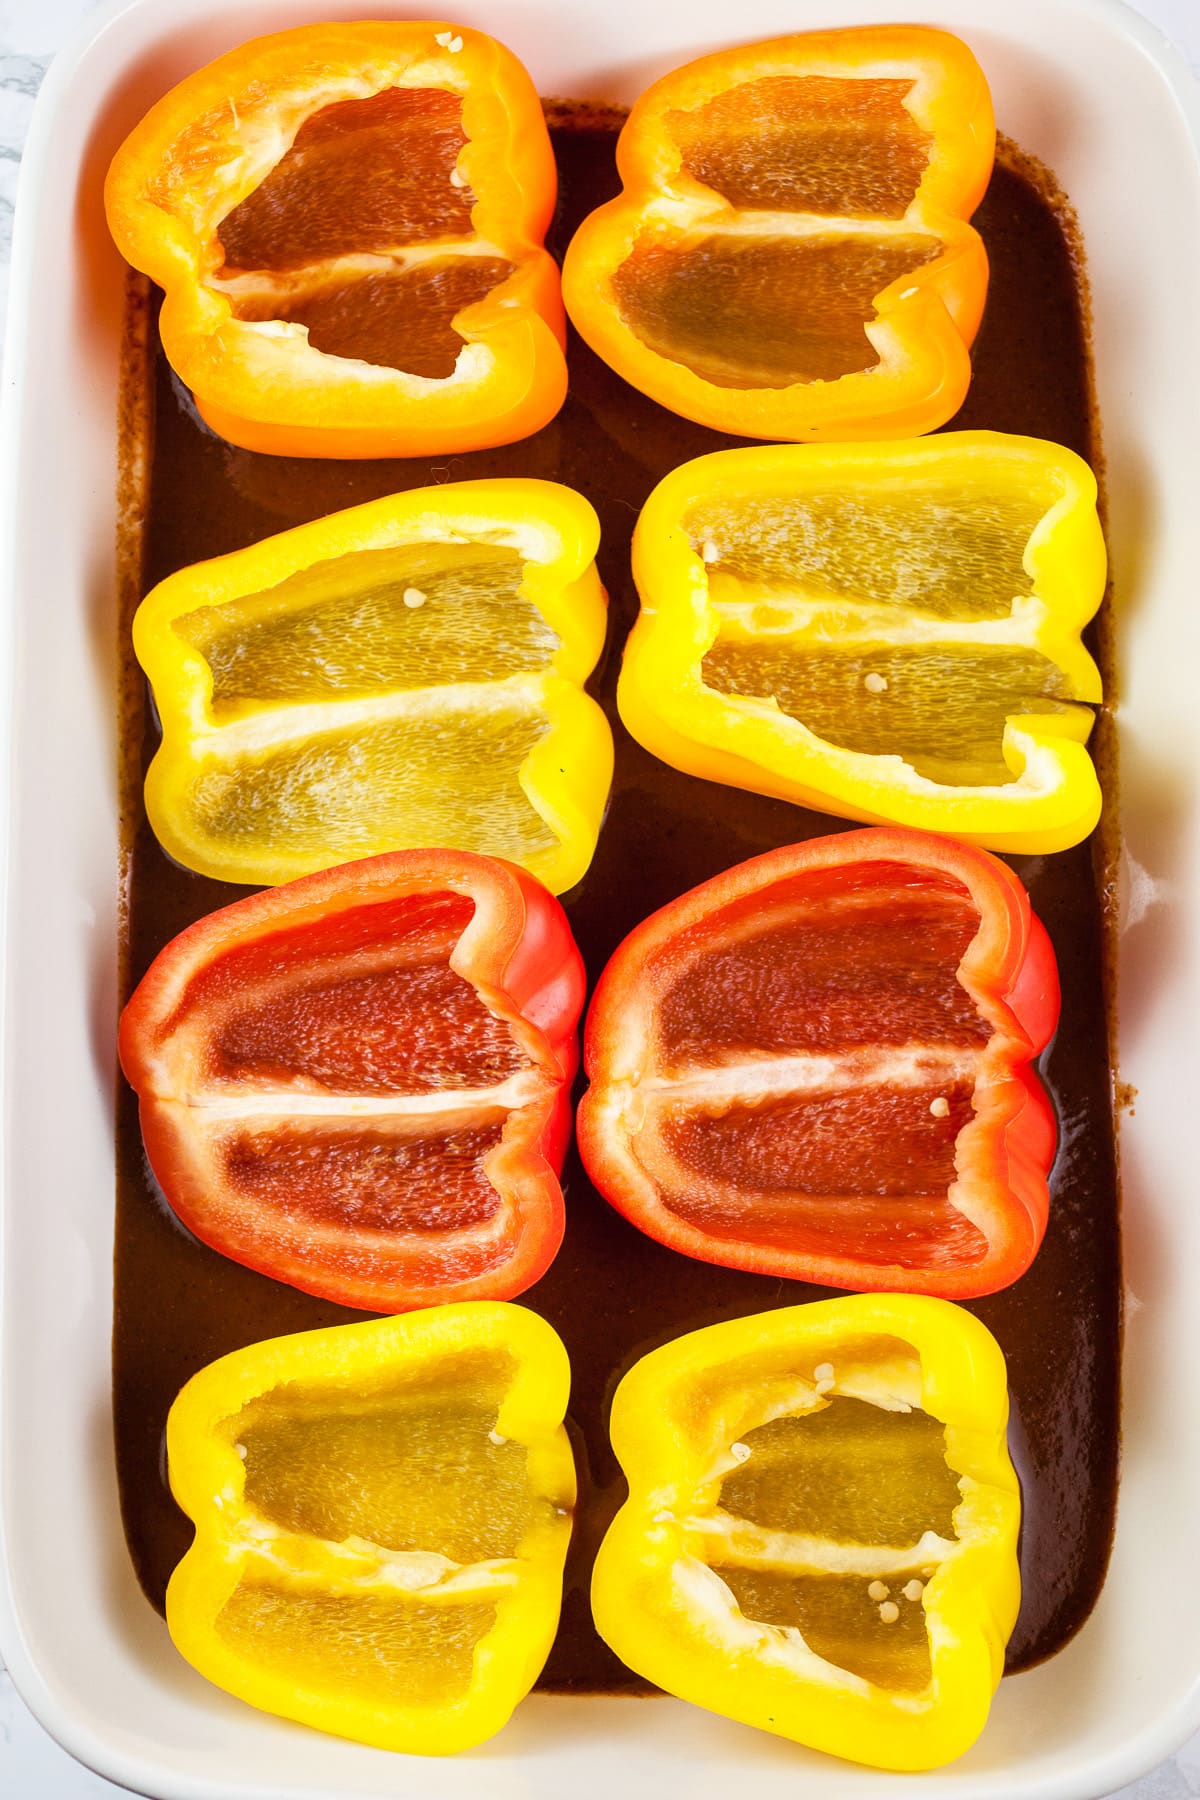 Bell pepper halves and red enchilada sauce in baking dish.